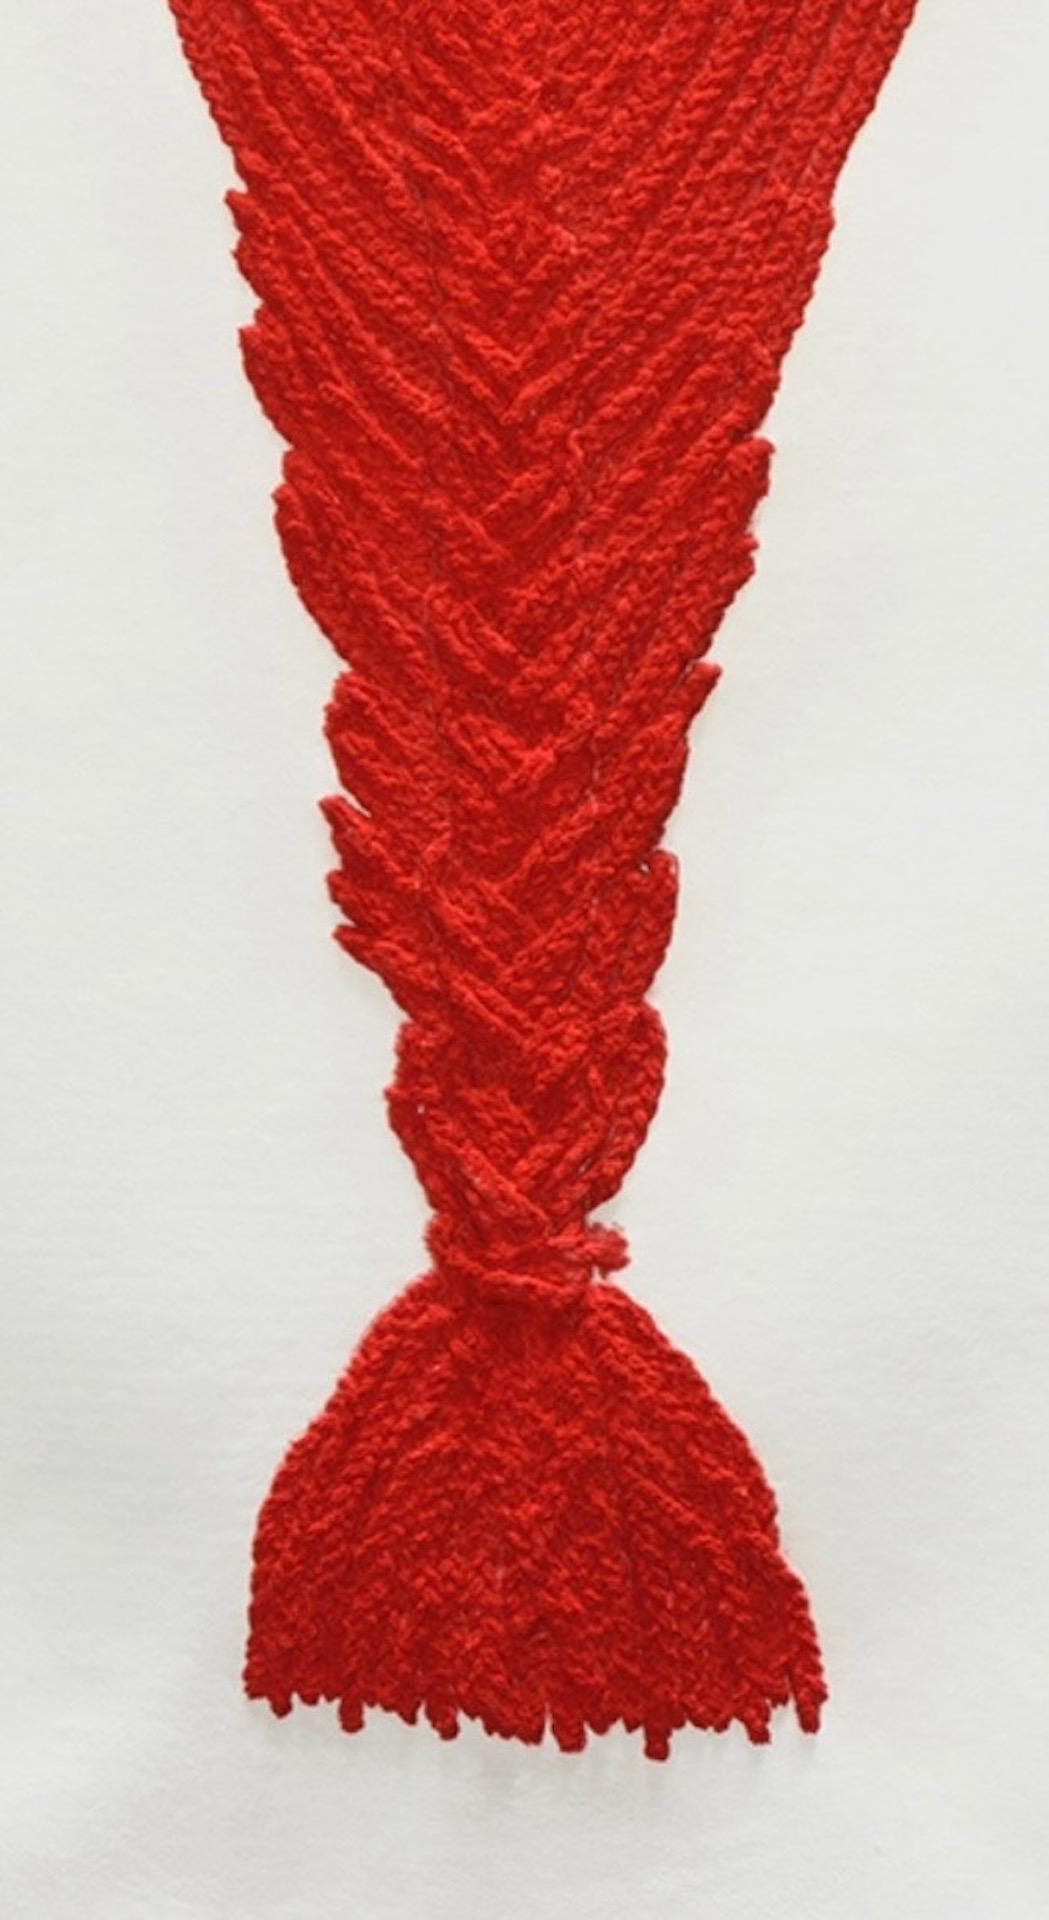 From Crochet Series I-V
Framed 
Initialed in pencil and numbered 49/50
Mixografia printed in red on handmade paper

Sheet size is 33.5 x 28 inches
Framed size is 37.25 x 32.13 inches
Co-published by Mixografia Workshop and SOLO